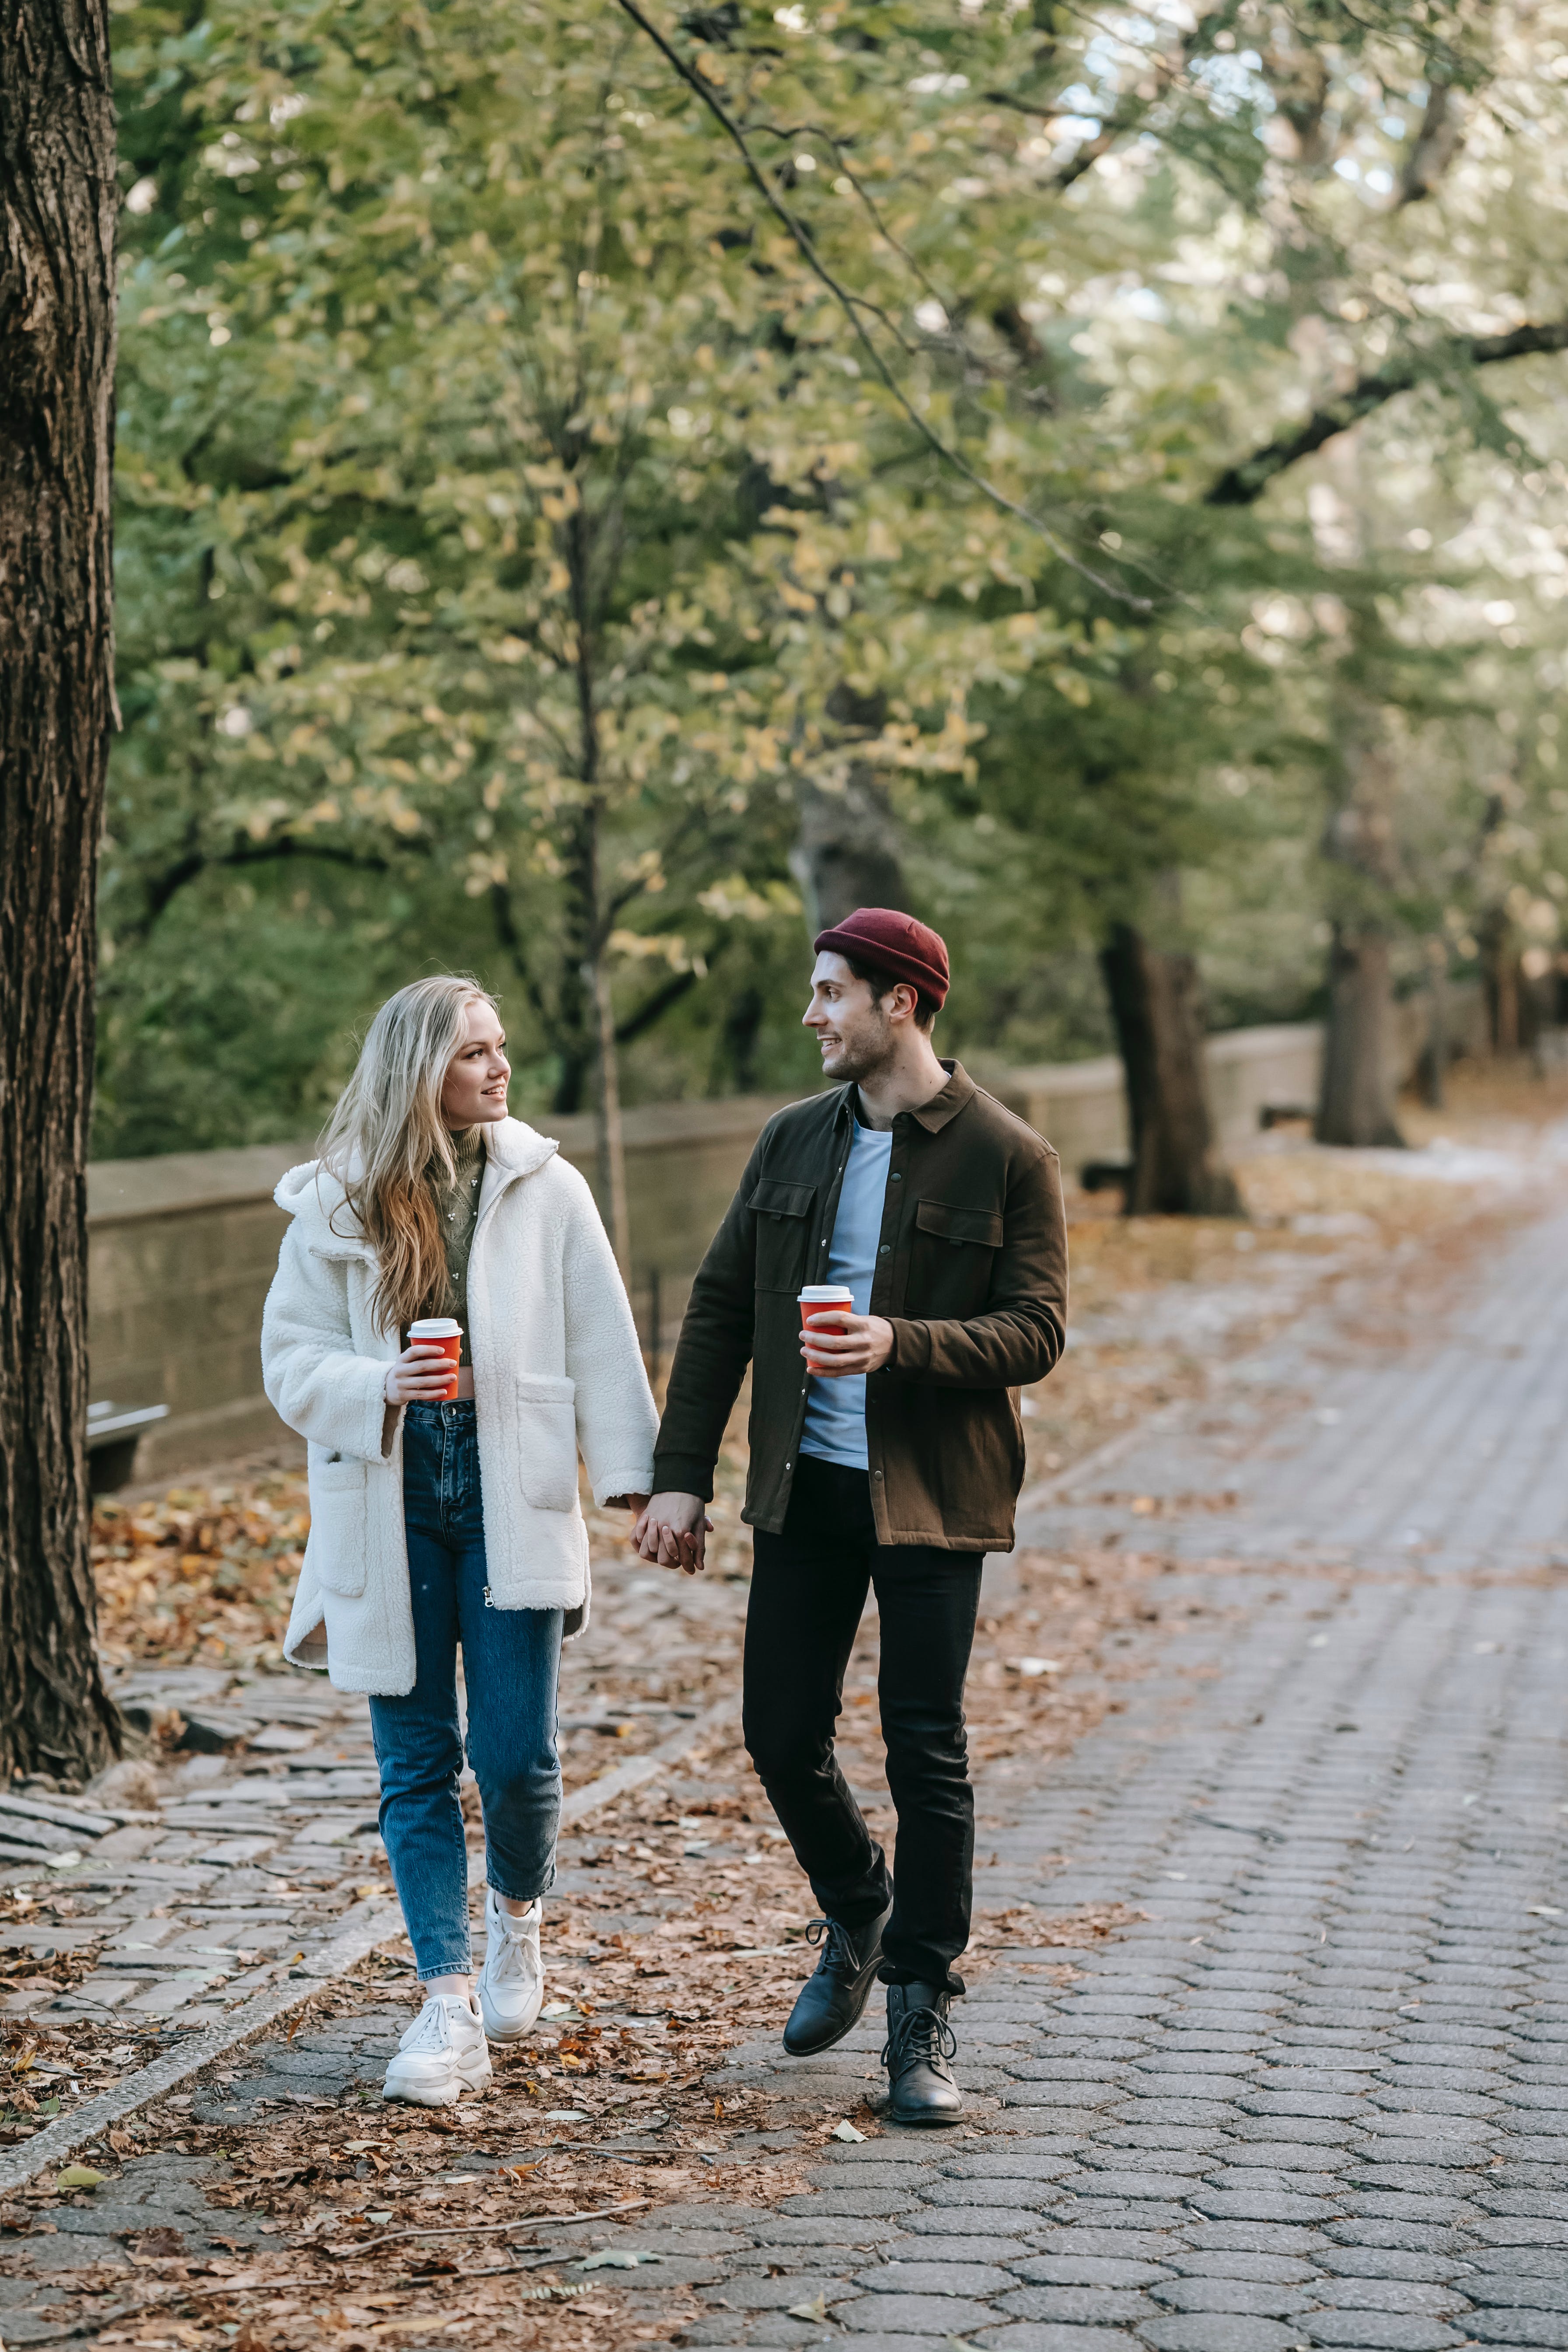 A man and woman talking over coffee | Source: Pexels